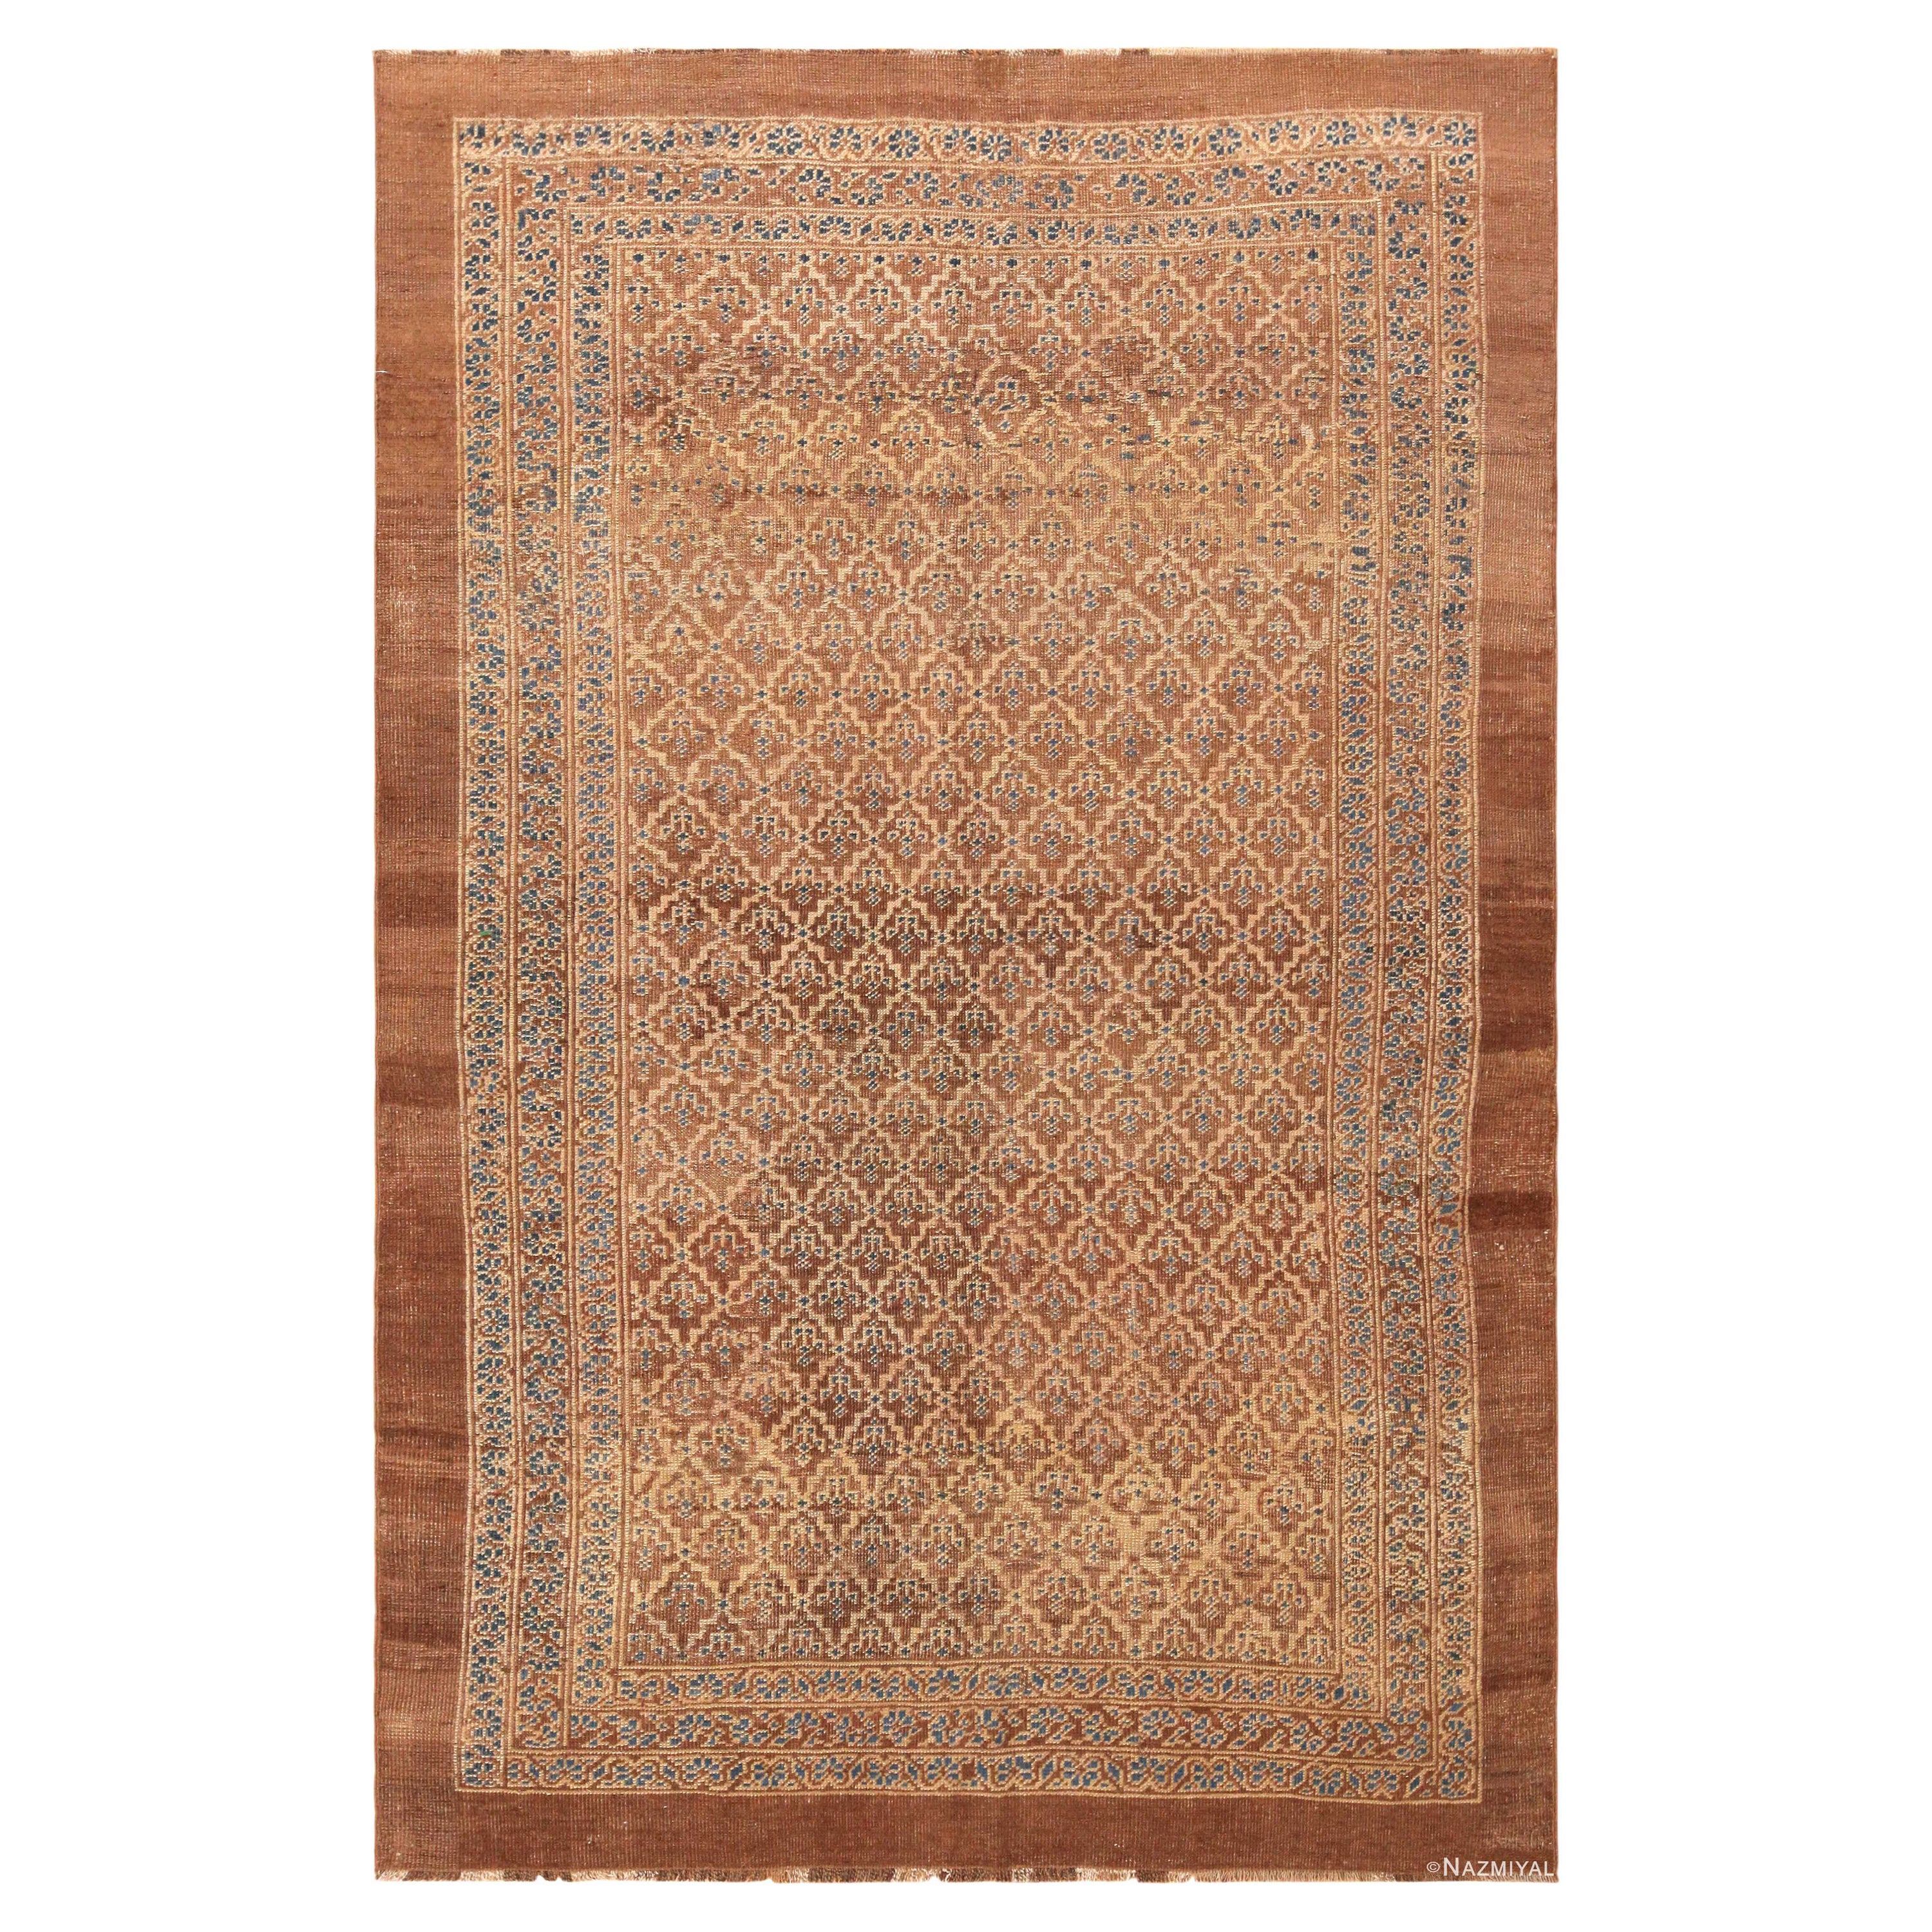 Nazmiyal Collection Antique Persian Bakshaish Rug. 5 ft 5 in x 8 ft 5 in 